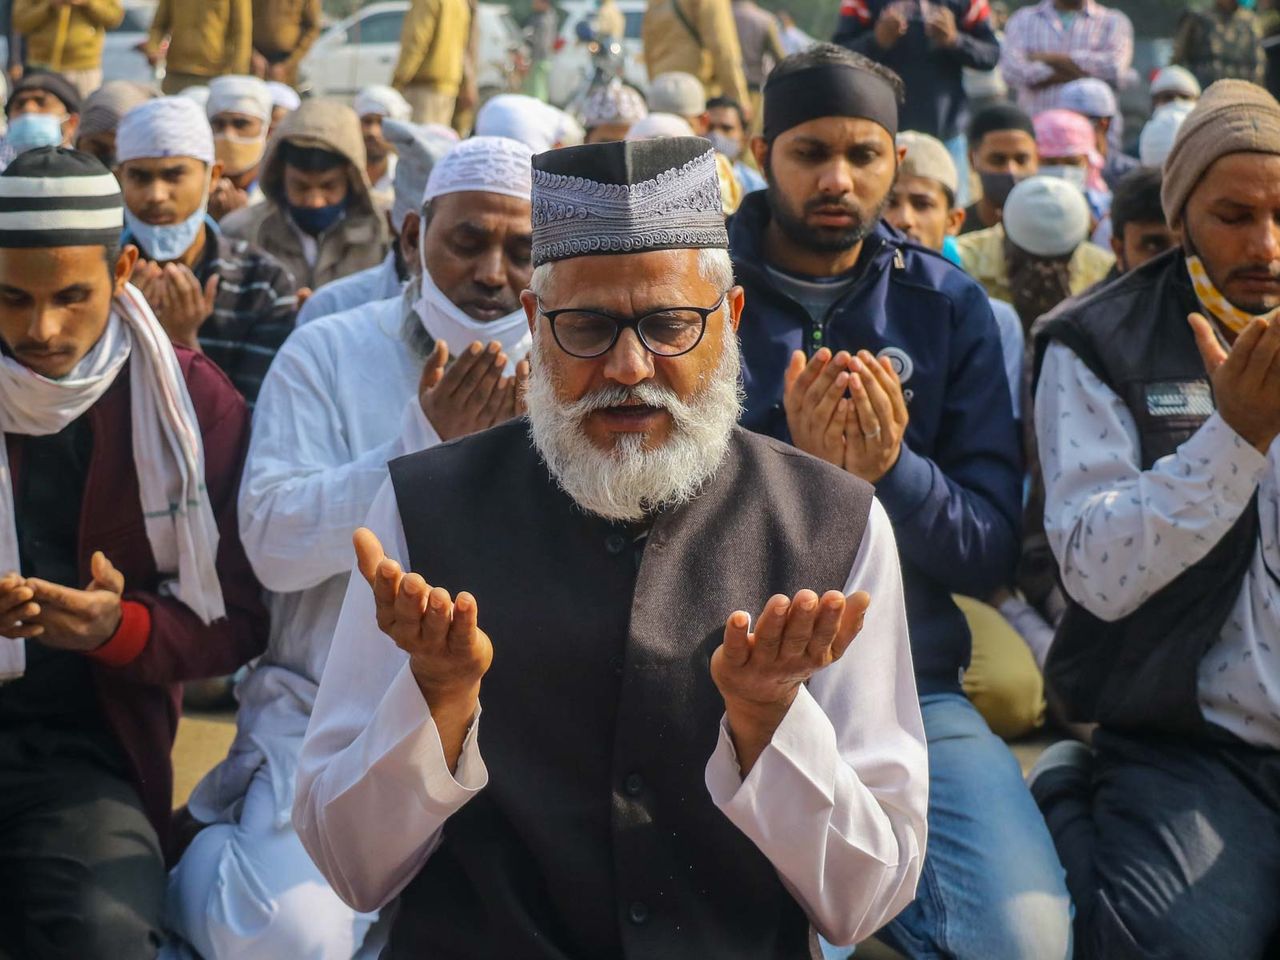 Muslim devotees offering Namaz in open area while people in Gurgaon protesting against open Namaz.